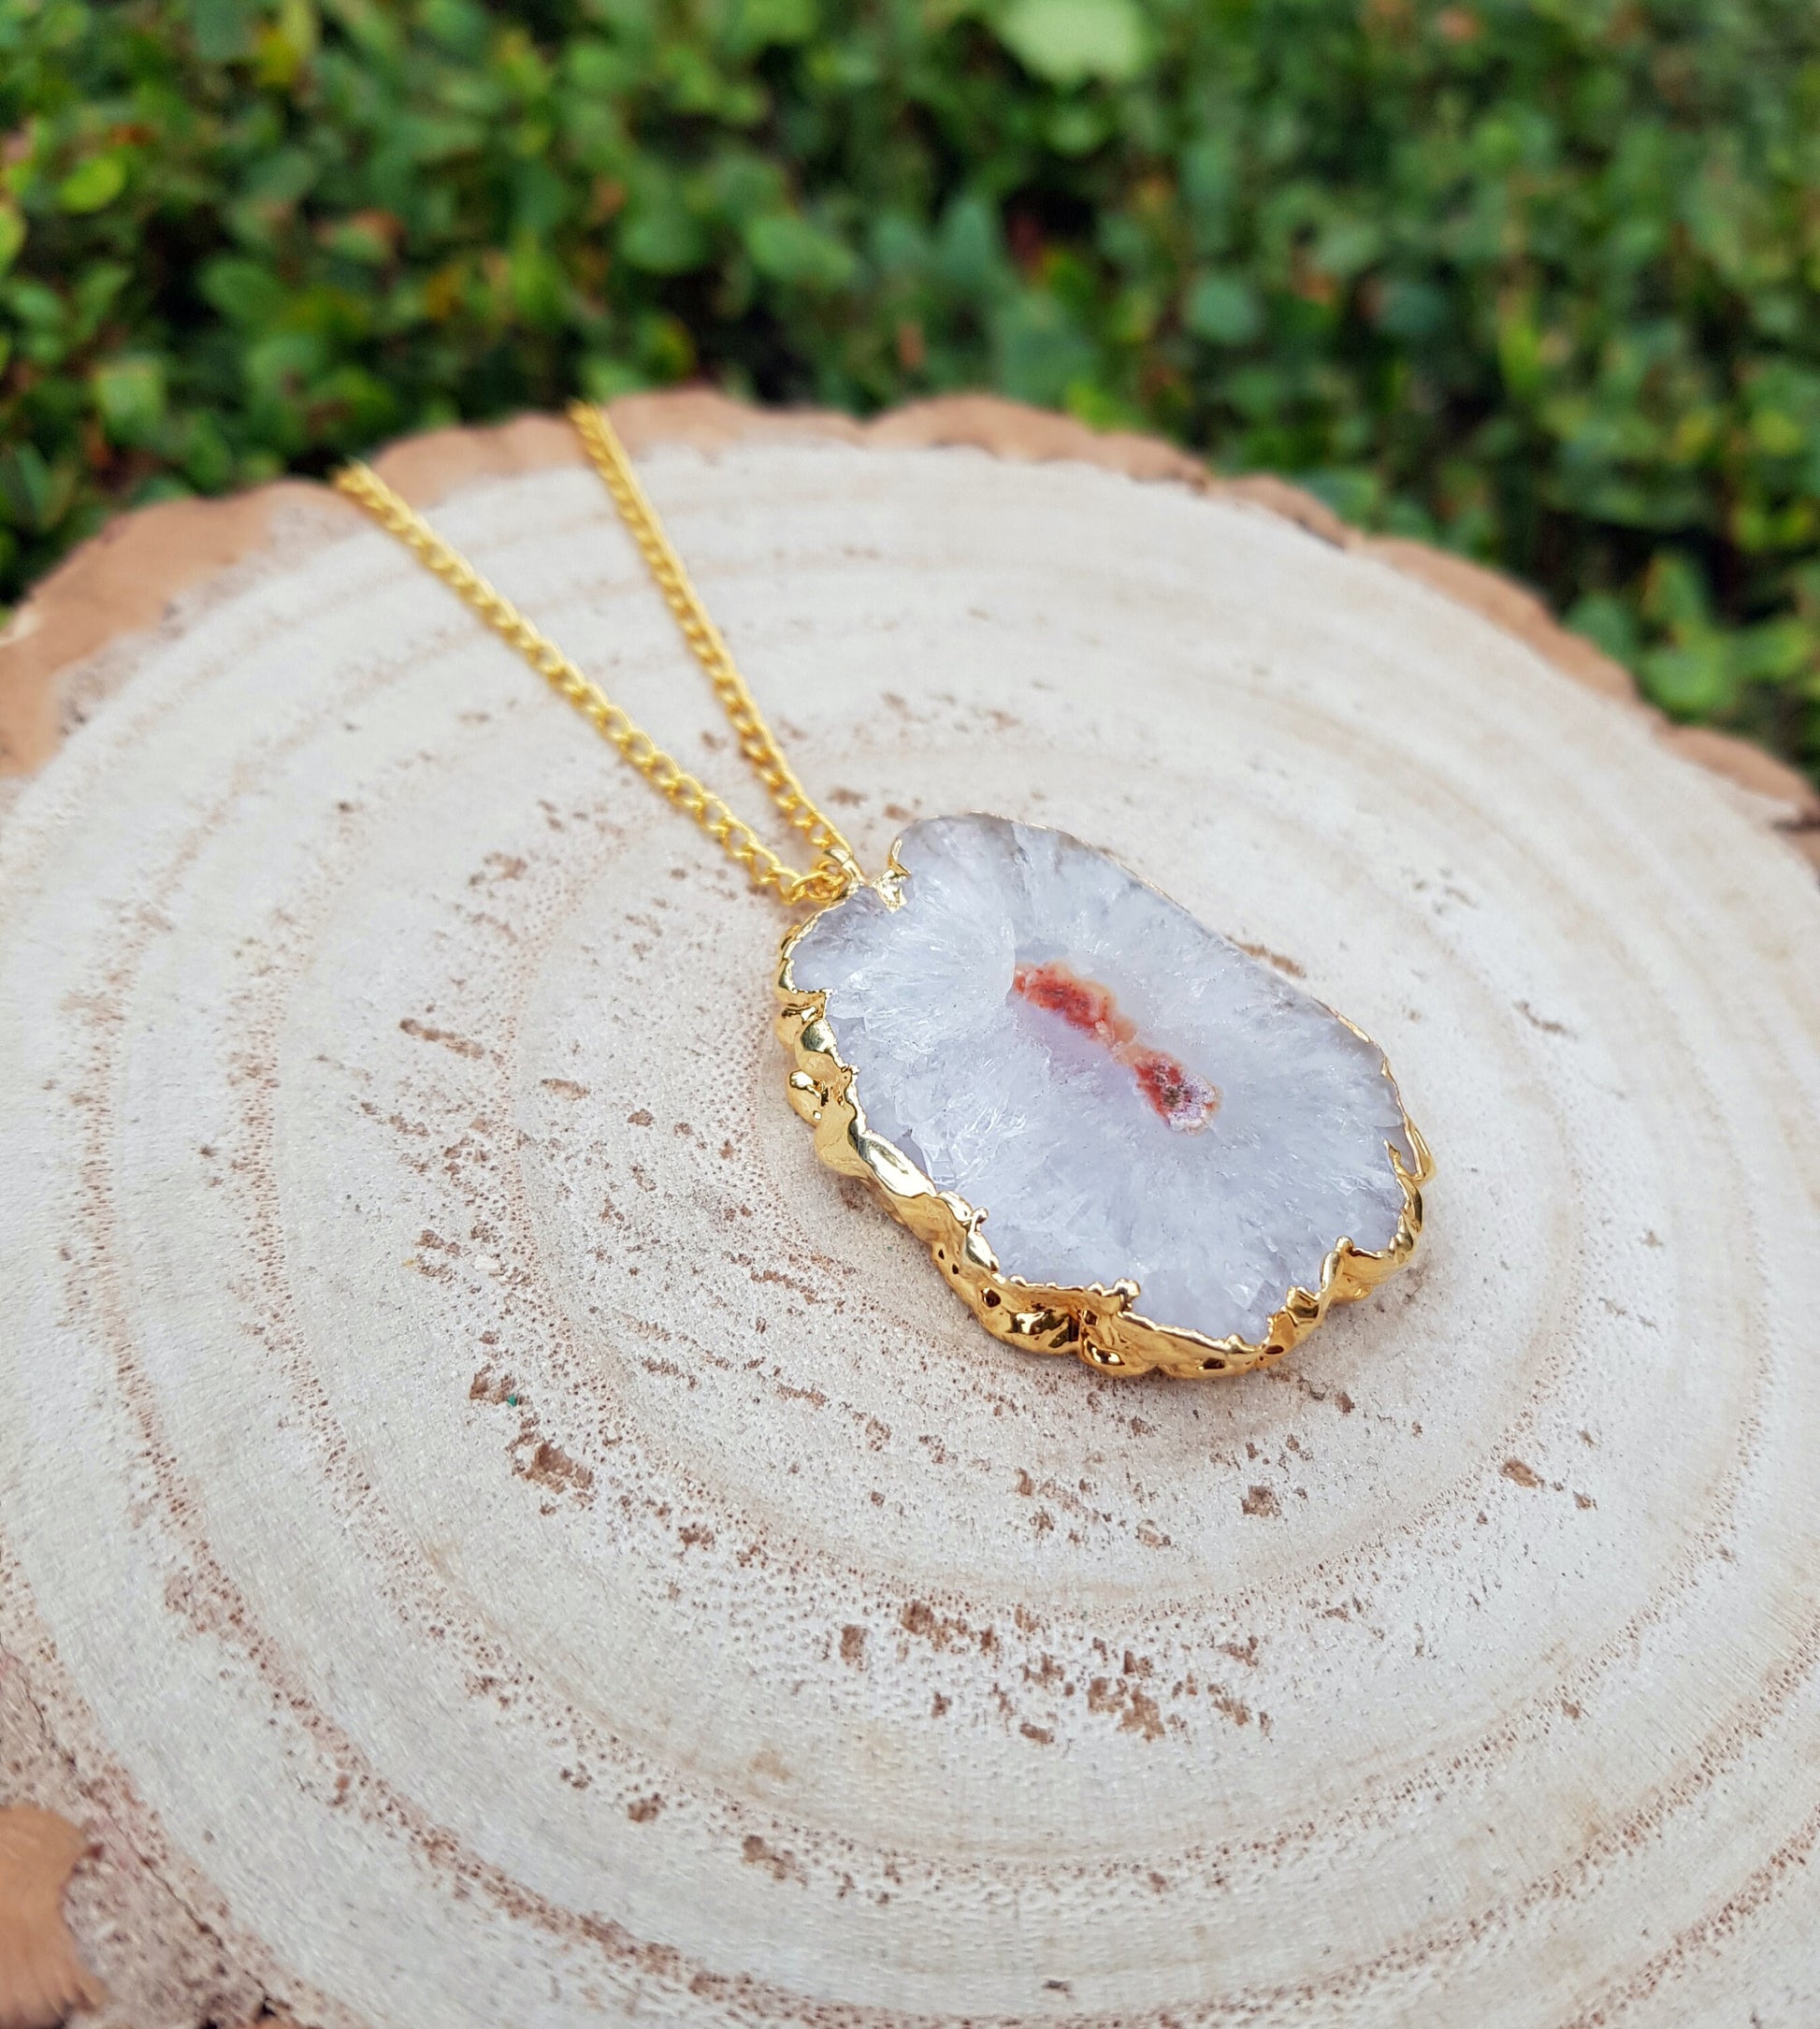 Solar Agate Pendant Gold Plated Statement Pendant Boho Gemstone Necklace Unique Gift One Of A Kind Gift